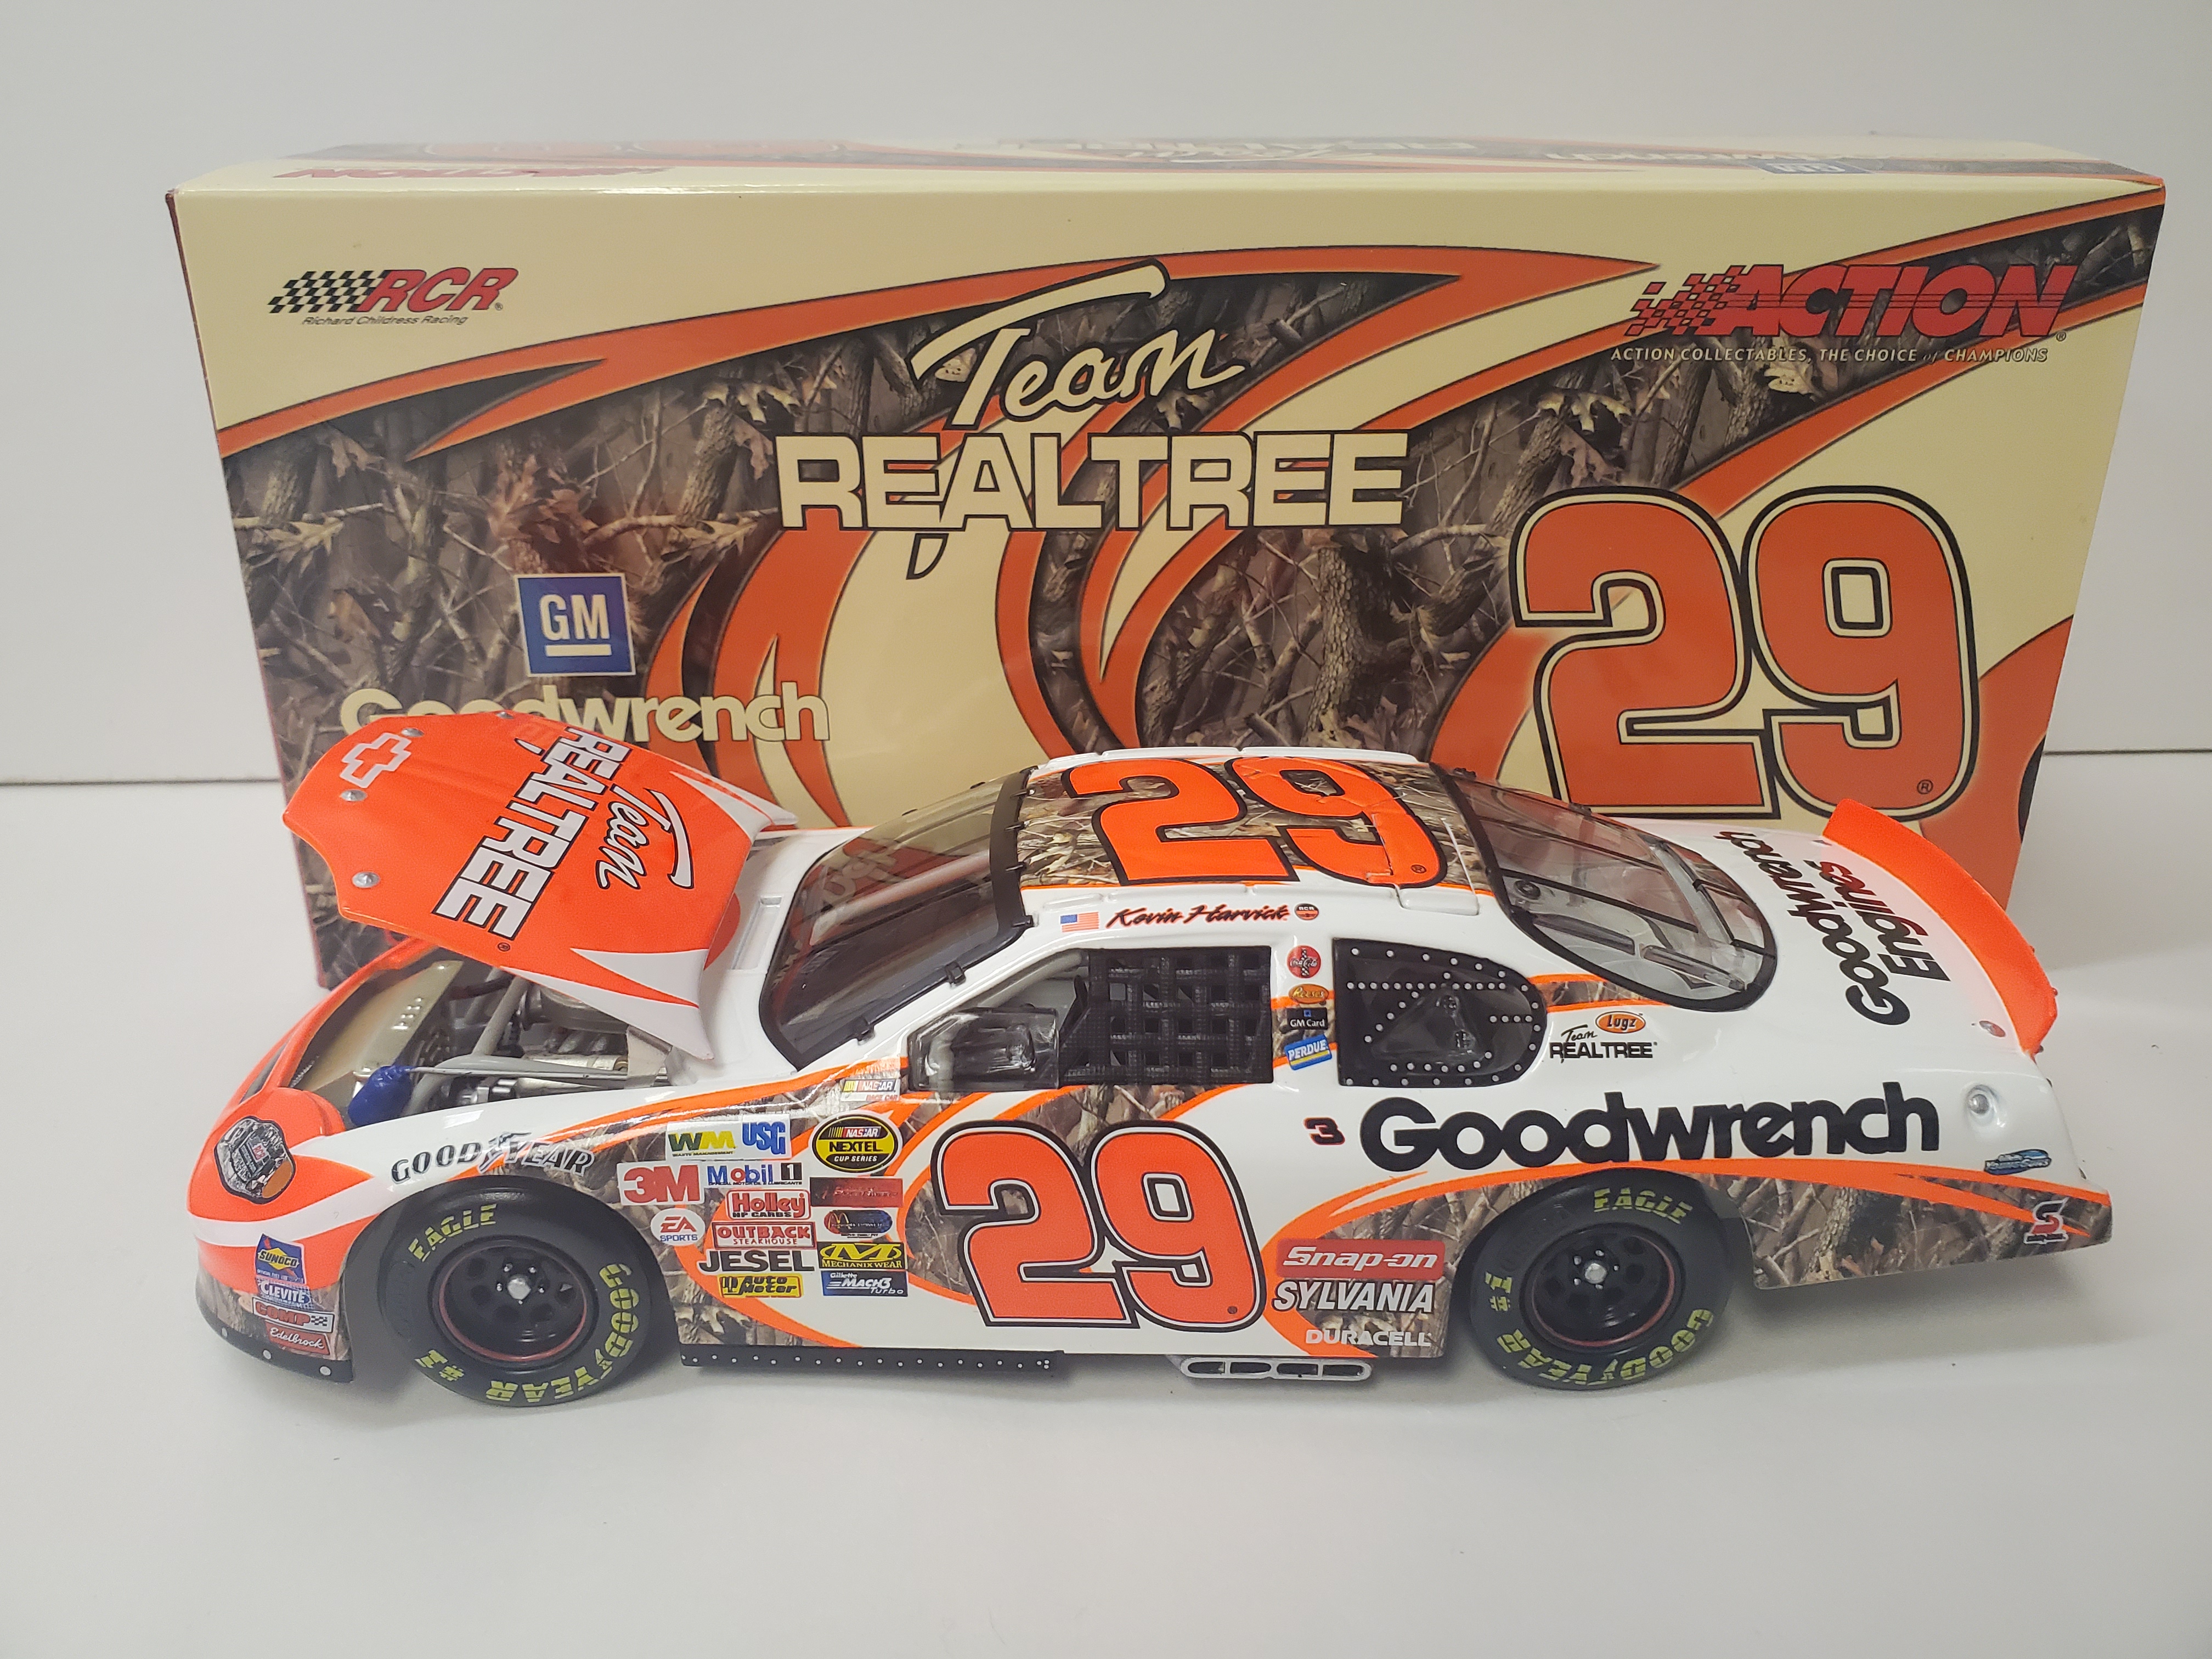 2004 Kevin Harvick GM Goodwrench Team Realtree 1/24 Action NASCAR Diecast 